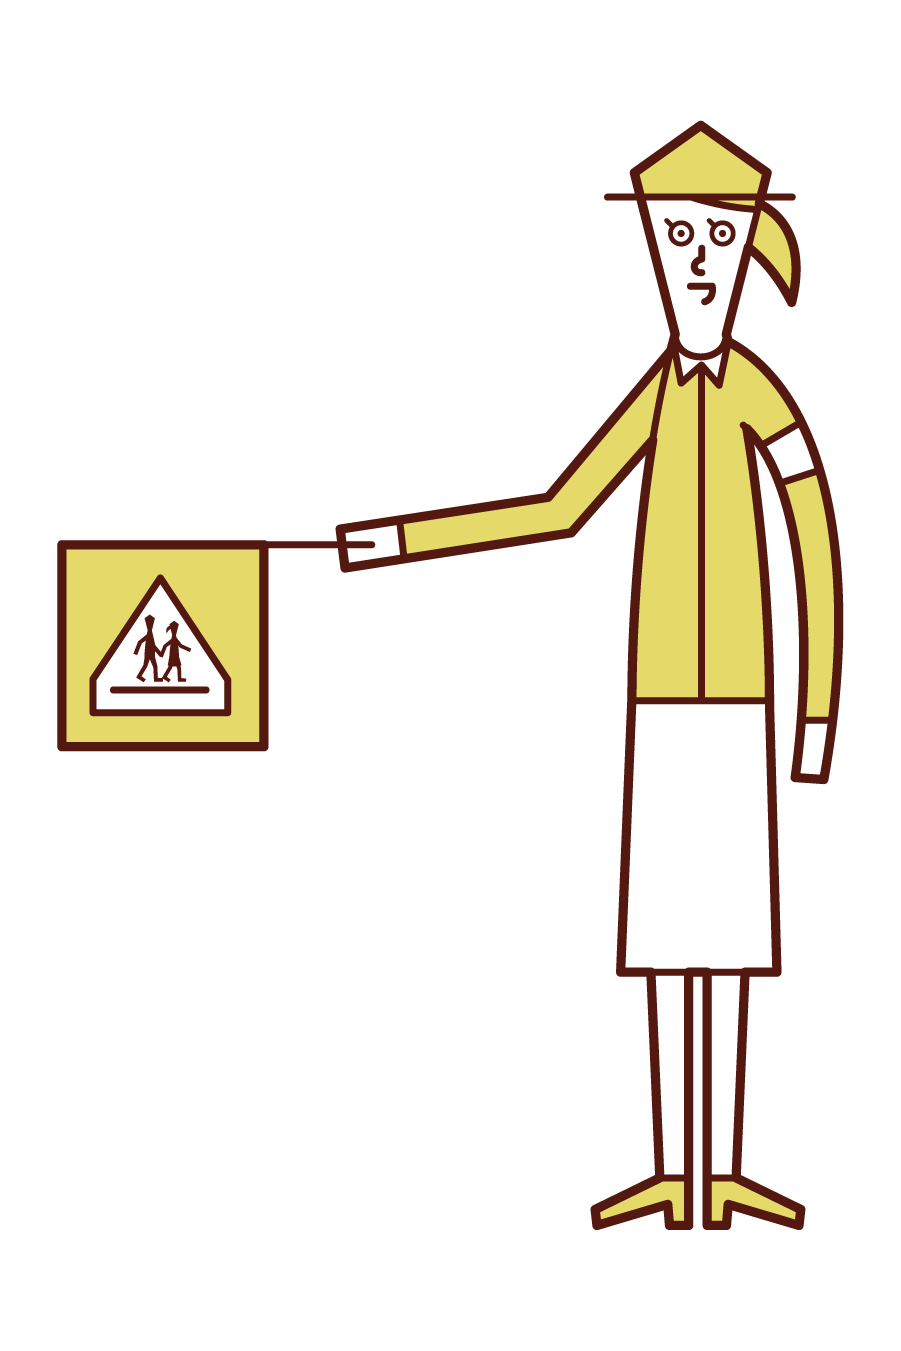 Illustration of a school child defender (woman) wearing a green hat and clothes